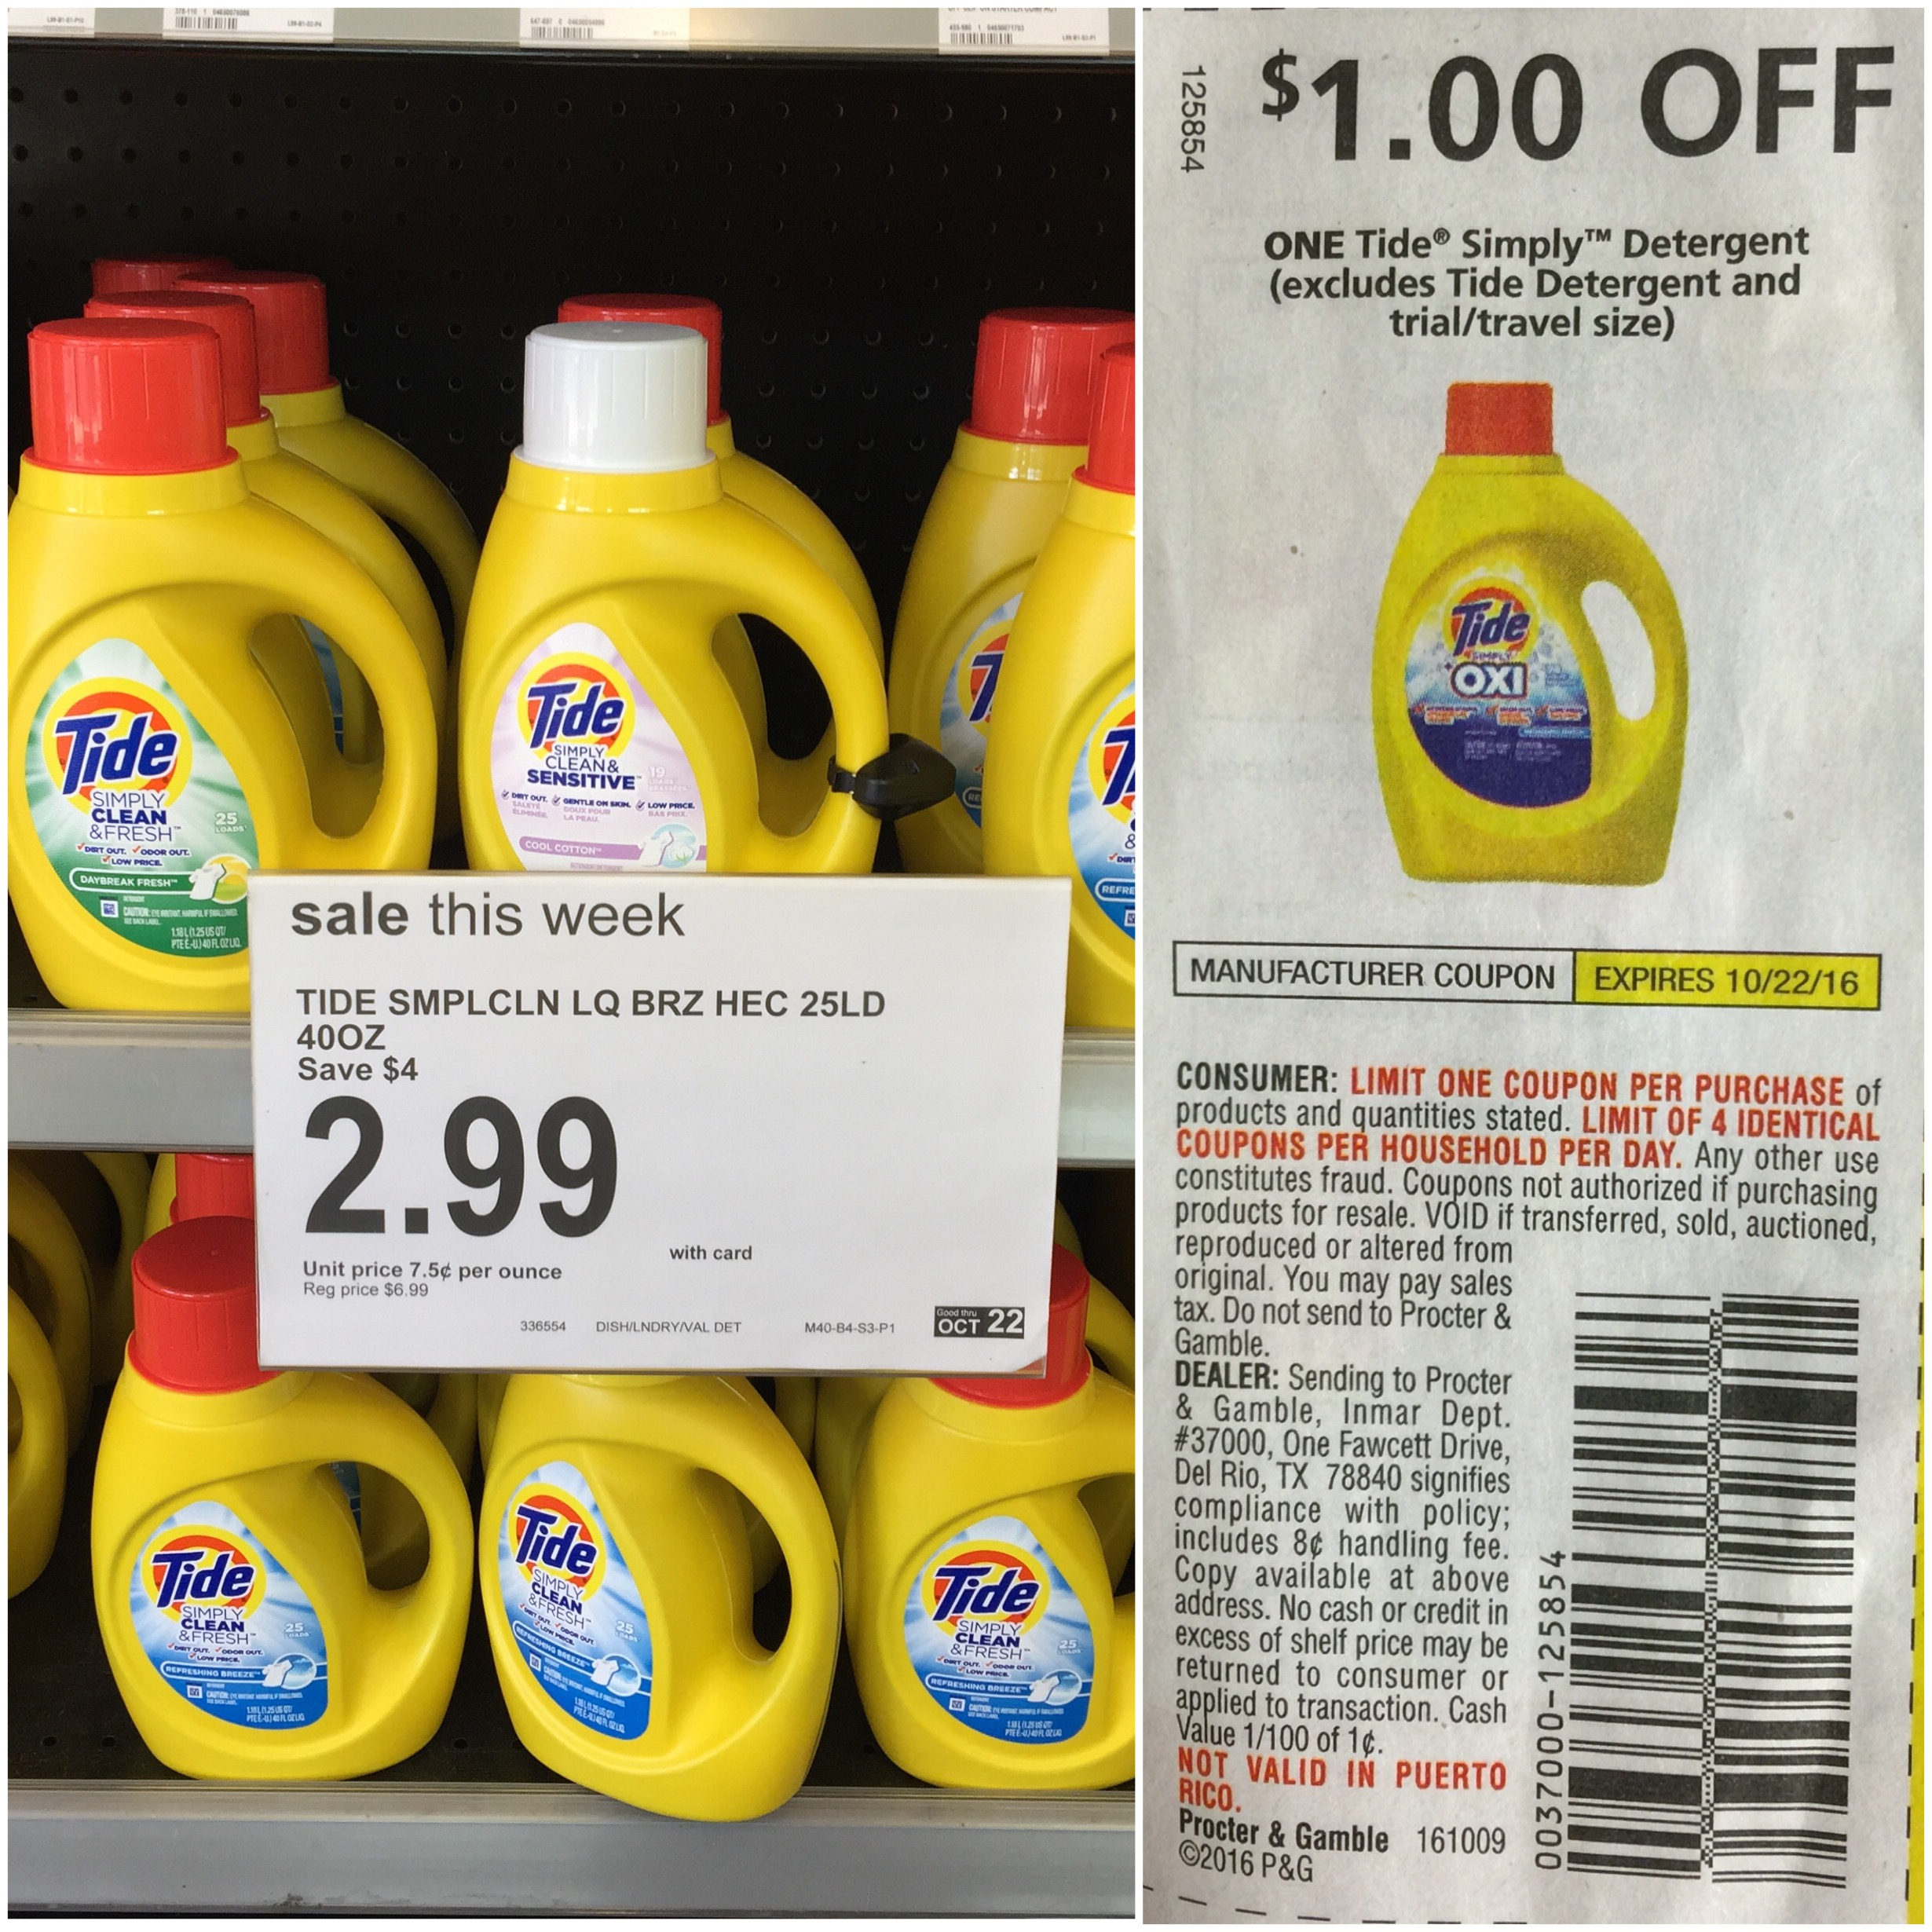 Free Printable Tide Simply Coupons | Download Them Or Print - Free Printable Tide Simply Coupons